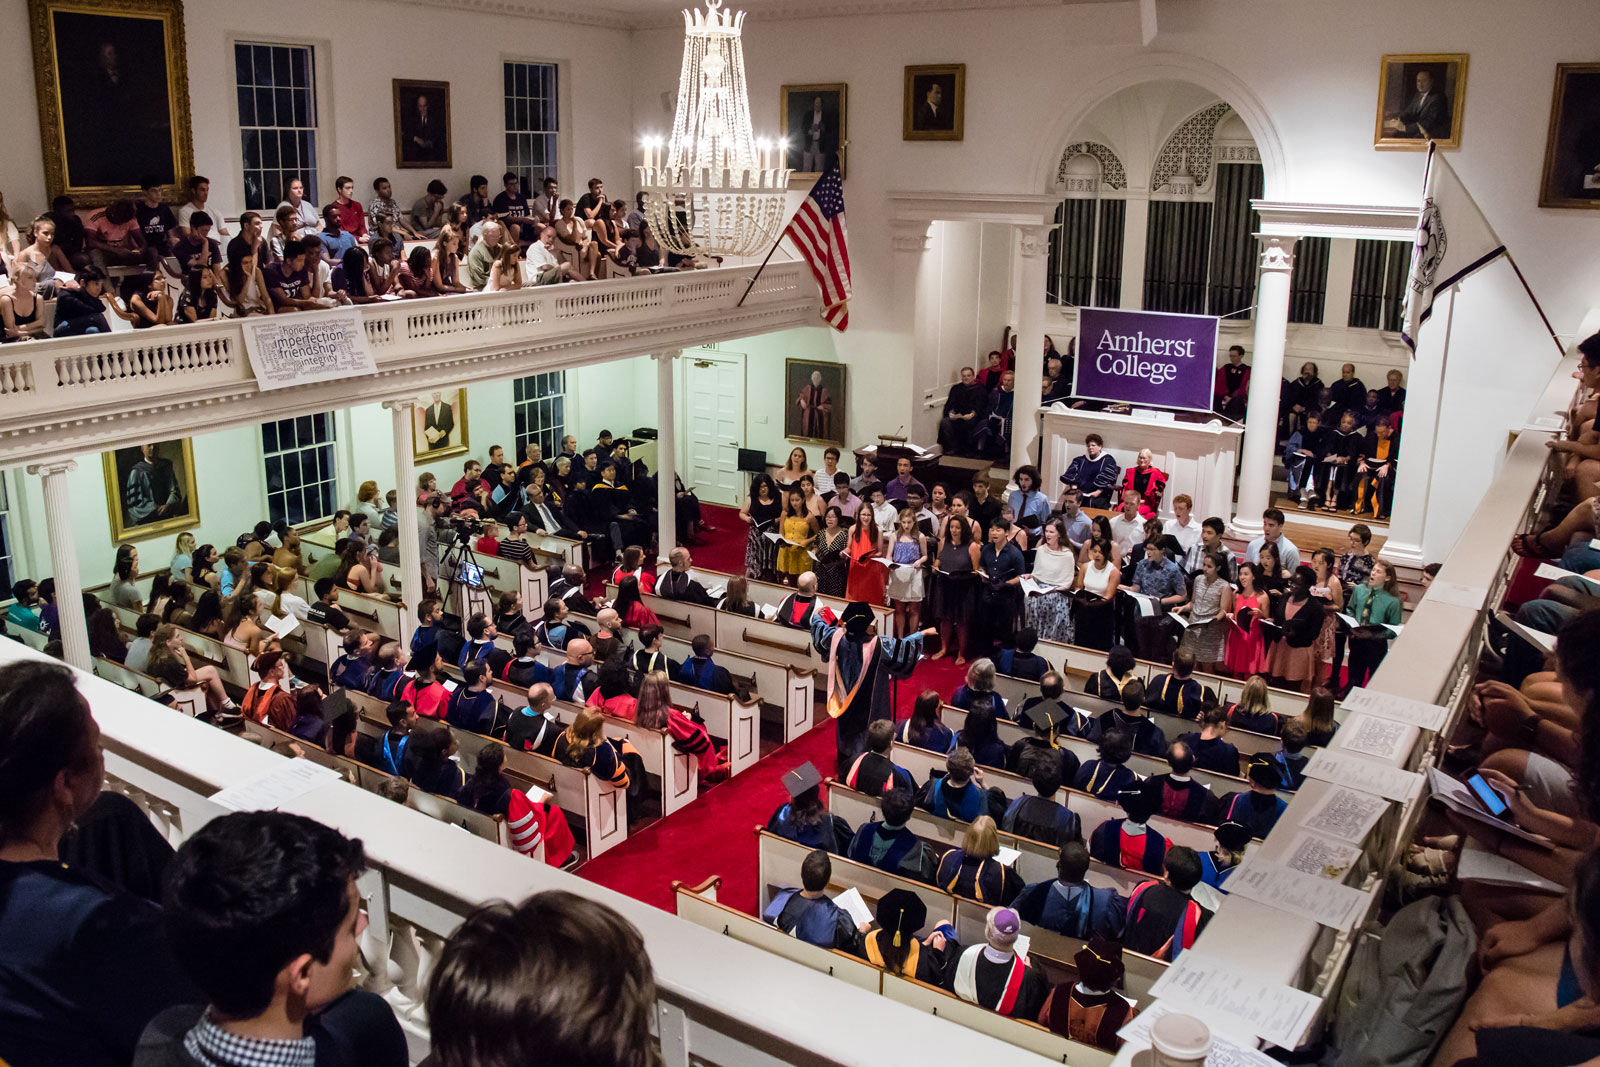 The crowd in Johnson Chapel, viewed from the balconey